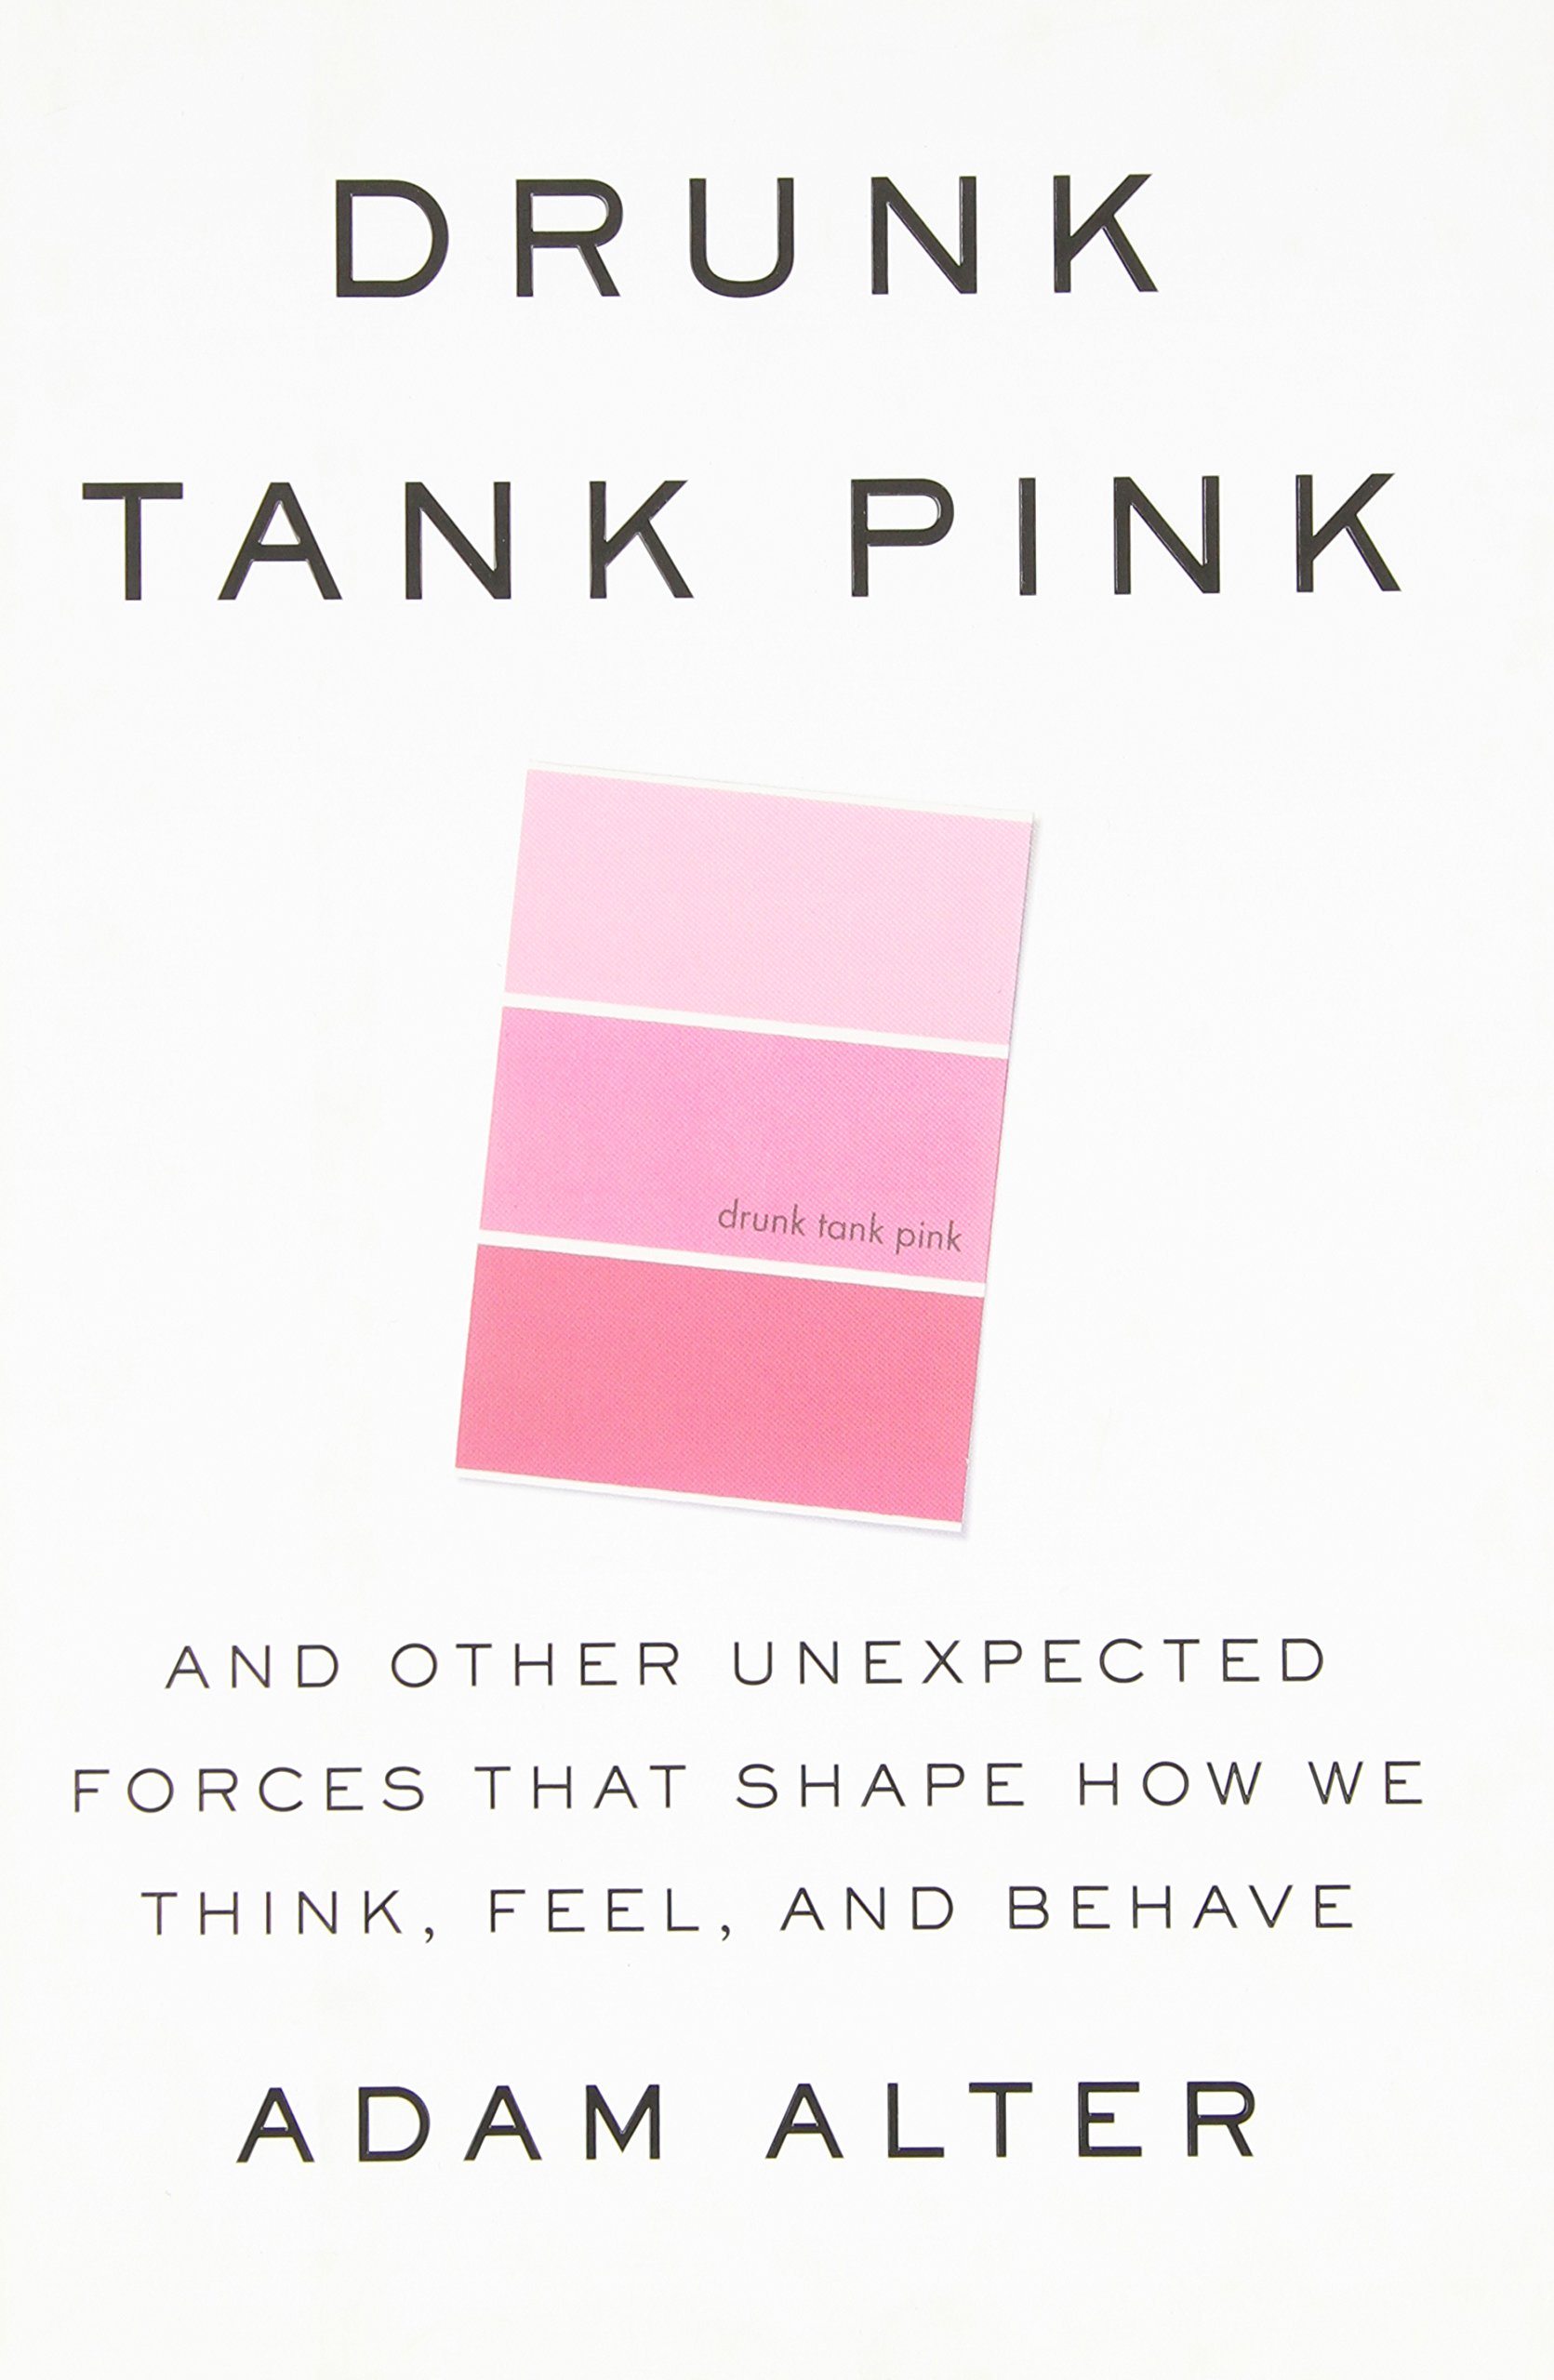 We will be discussing, Drunk Tank Pink by Adam Alter.